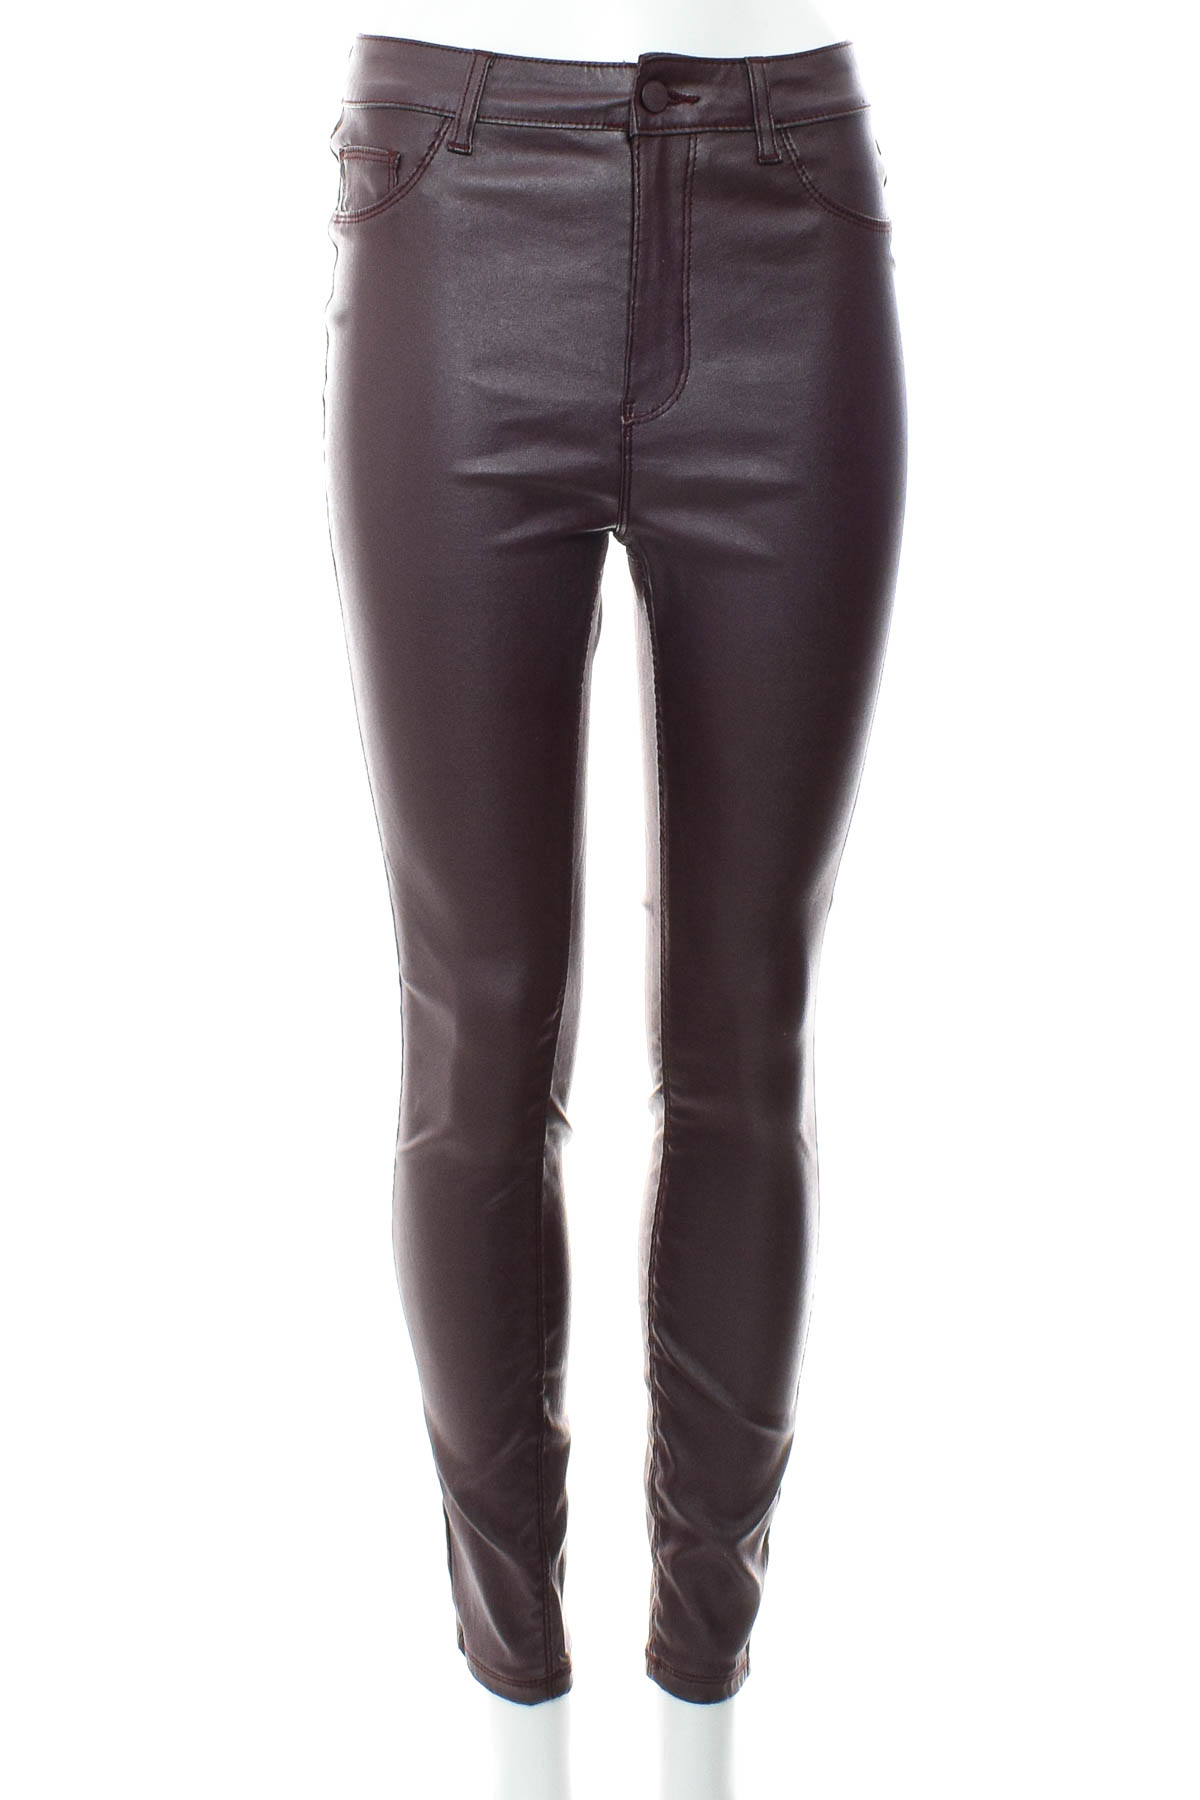 Women's leather trousers - PRIMARK - 0